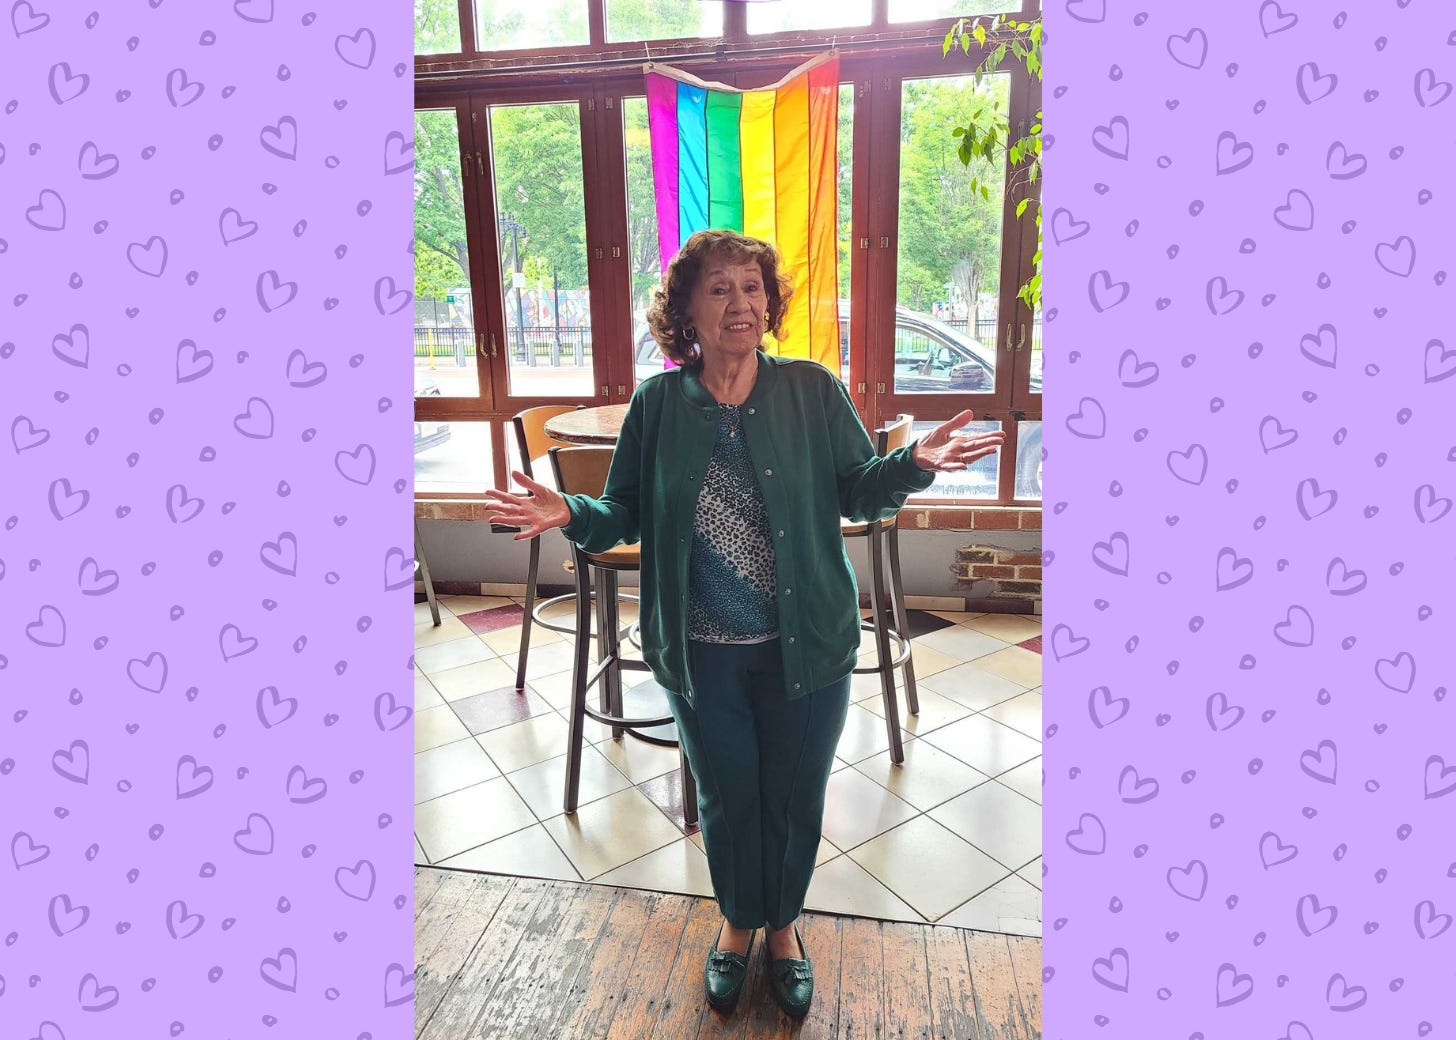 Nana standing in front of a pride flag